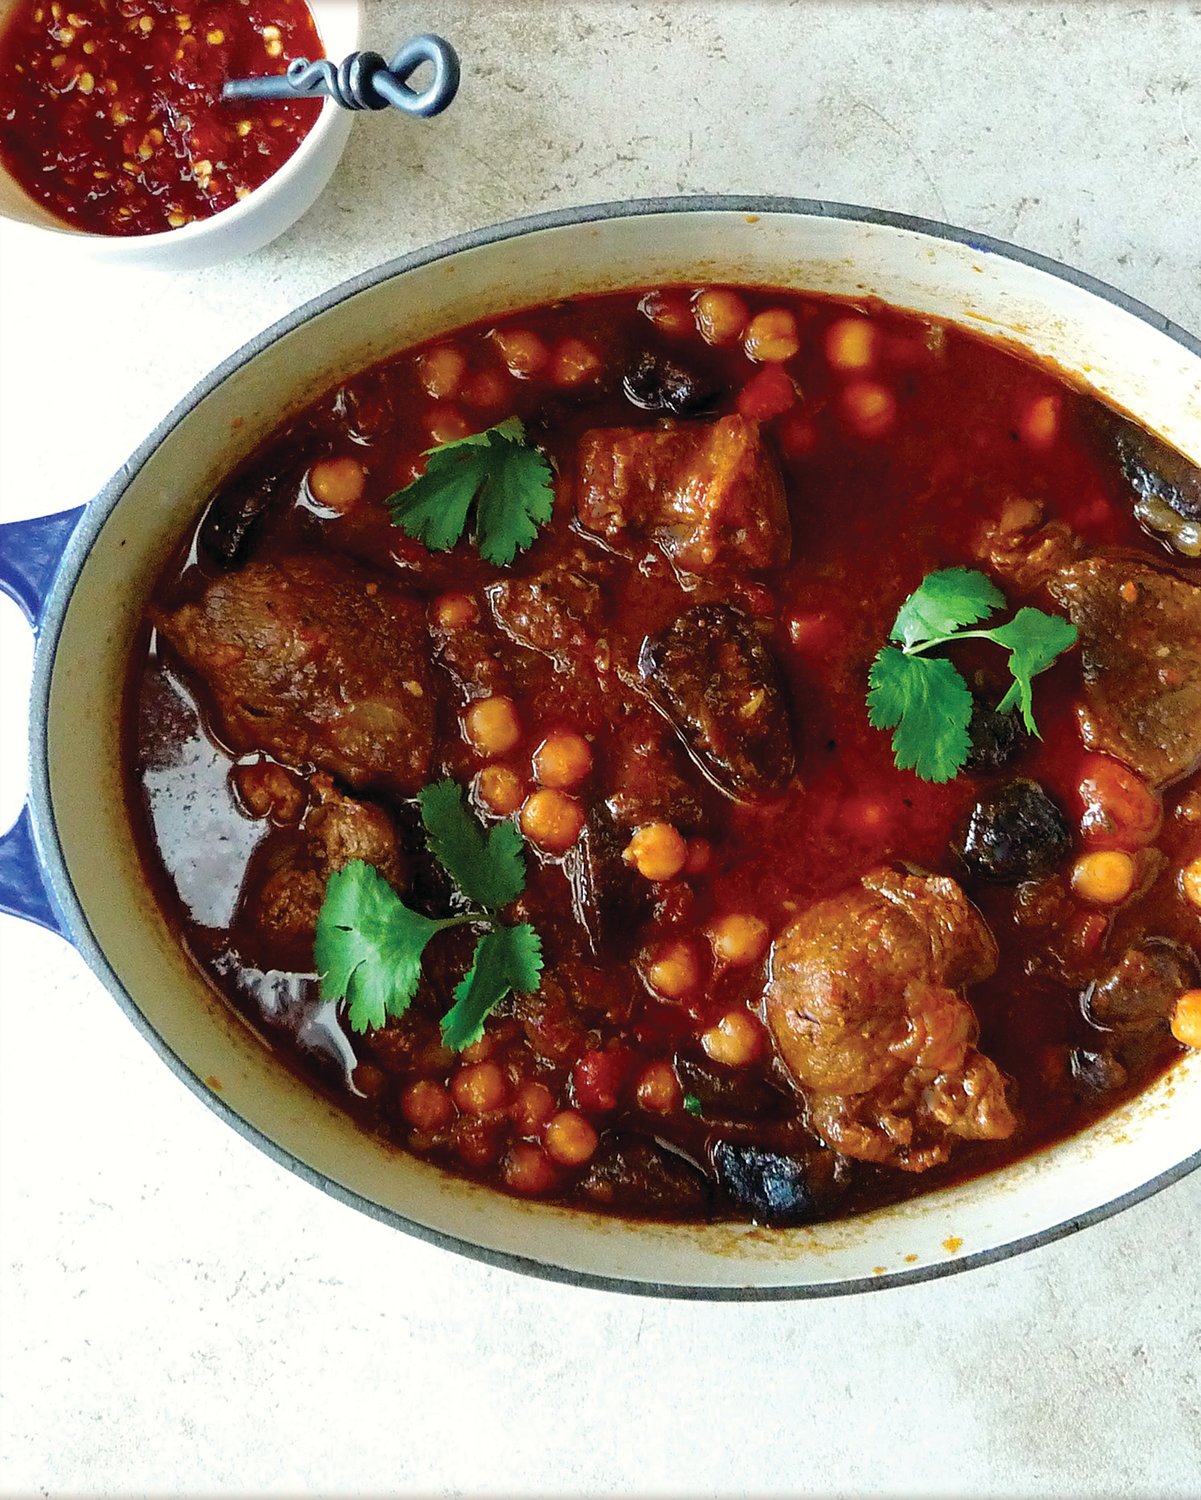 This stew is fragrant and meaty, softly sweetened with figs, heady with harissa, and redolent with ras el hanout, which is a North African spice blend consisting of an entire shelf of spices, including cinnamon, cardamom, turmeric, ginger and clove.